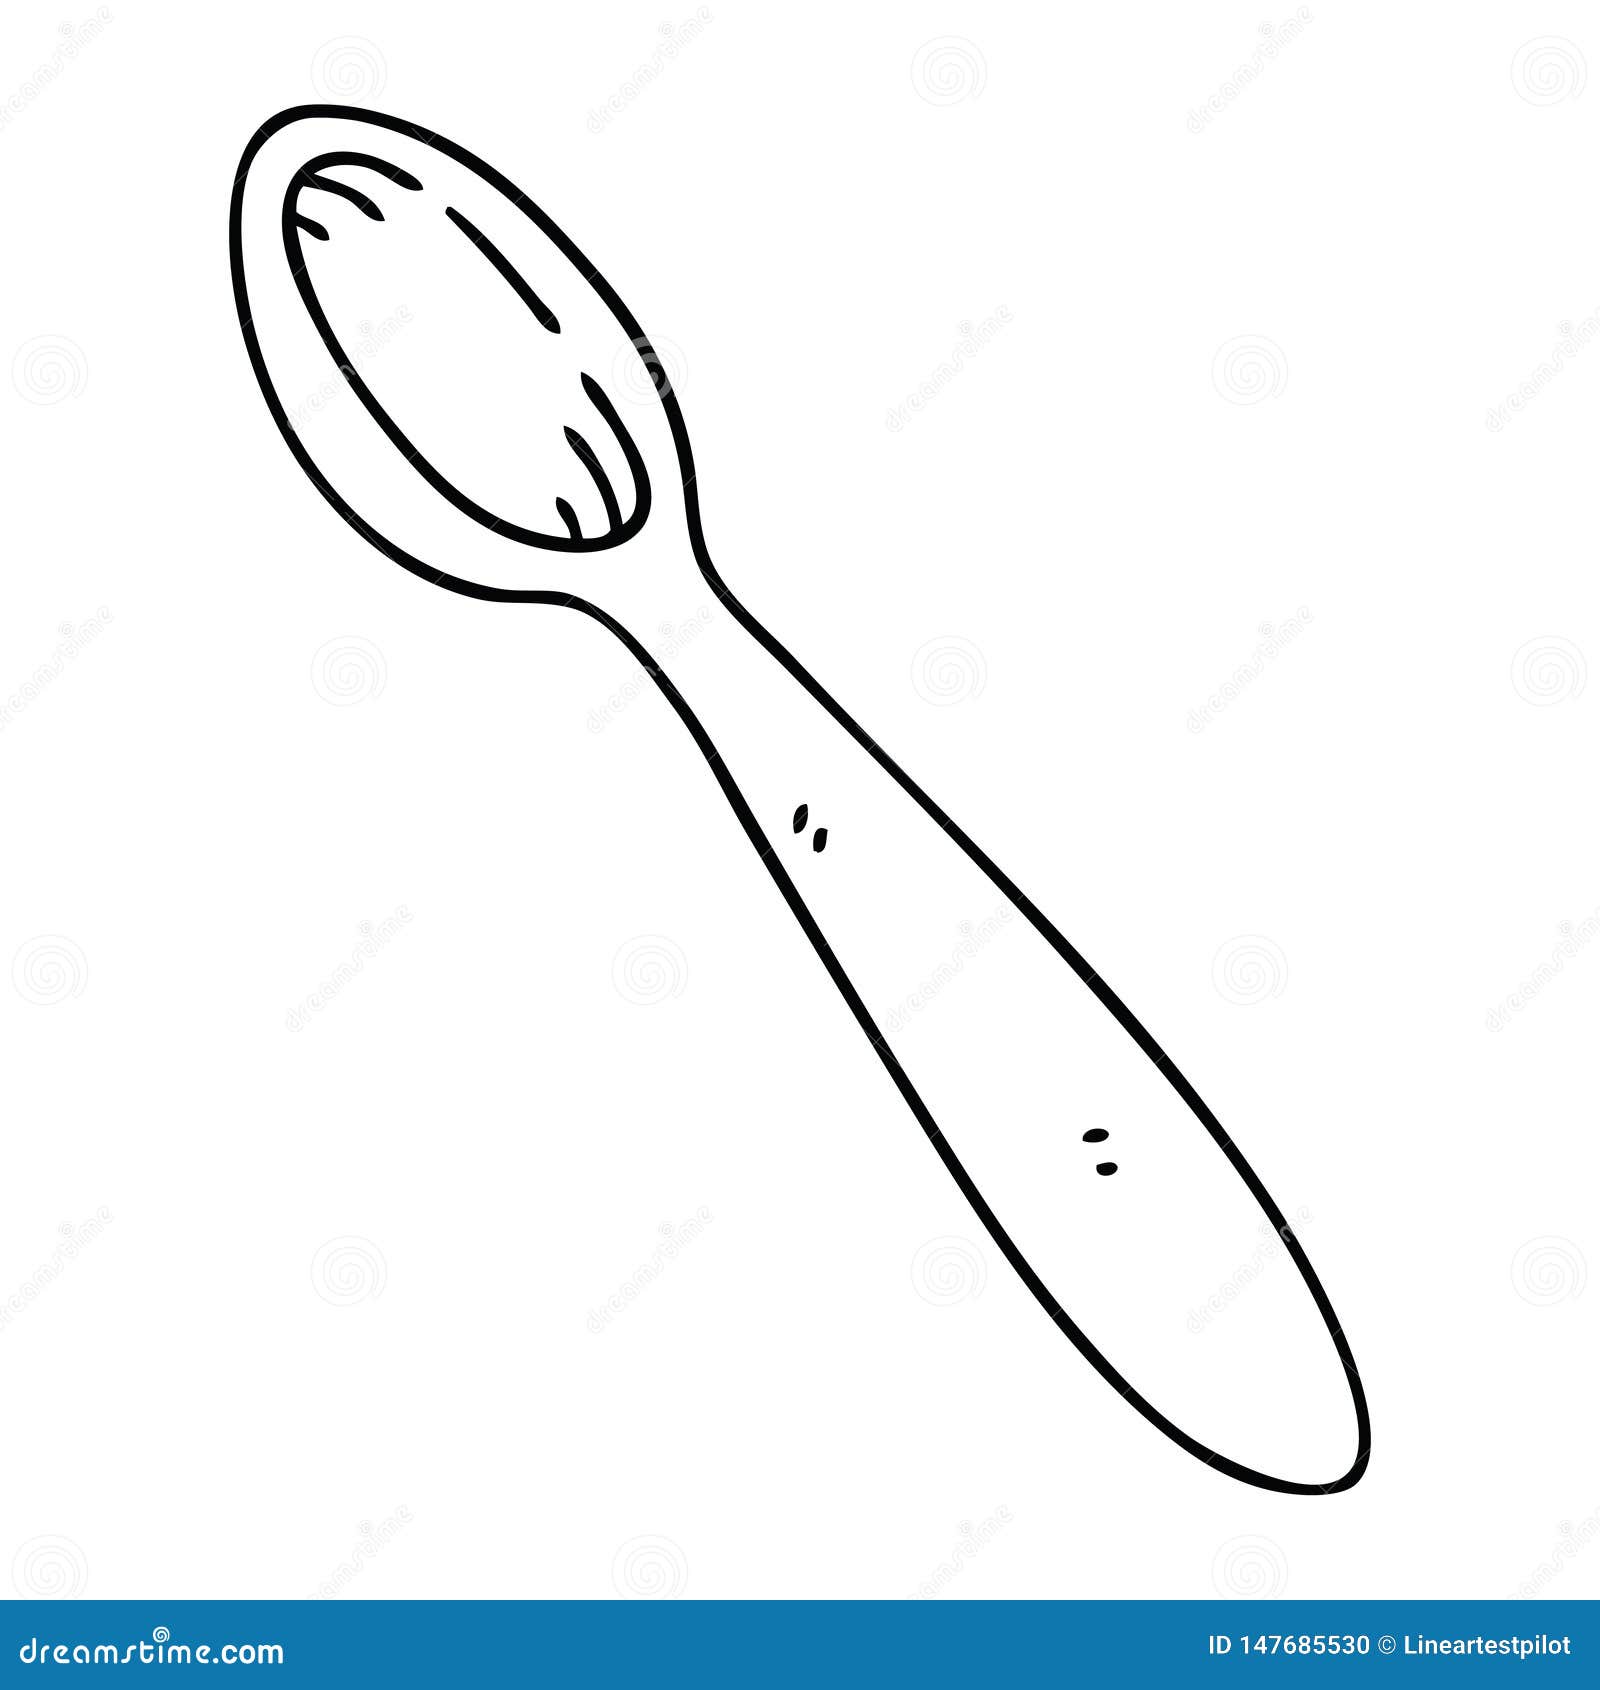 Russian traditional wooden spoon icon in outline Vector Image